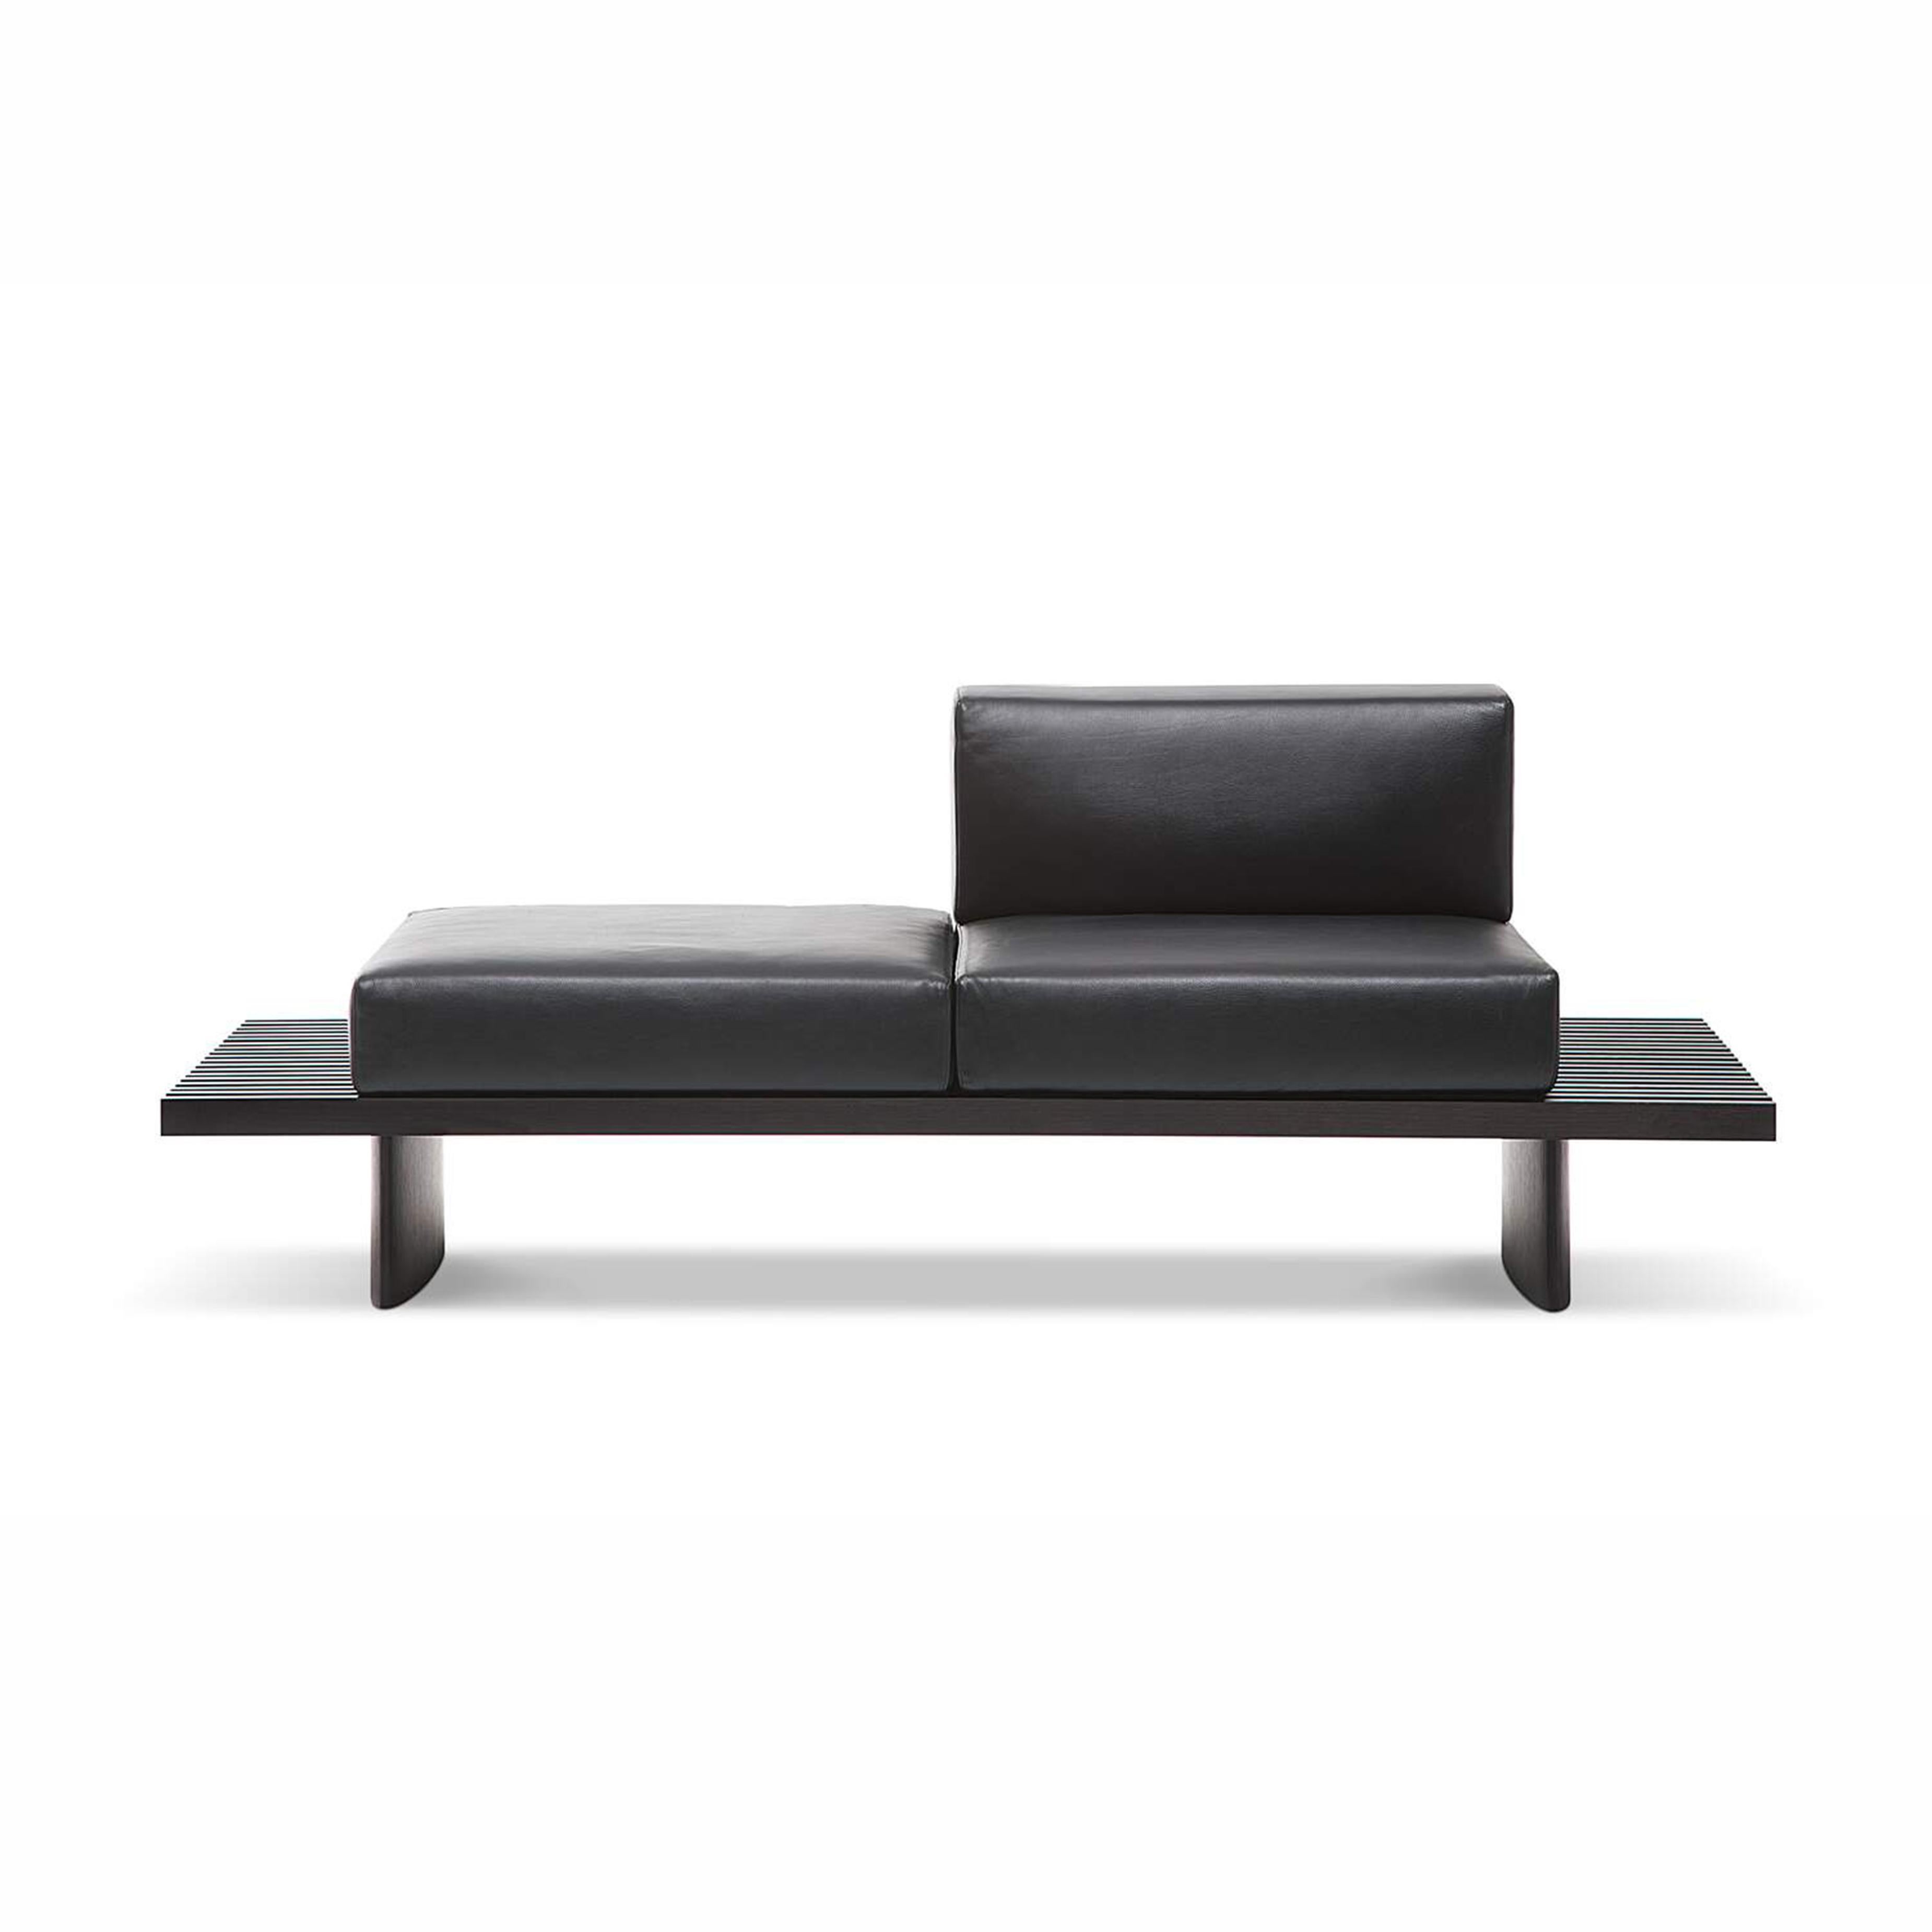 Mid-Century Modern Charlotte Perriand Refolo Modular Sofa, Wood and Black Leather by Cassina For Sale